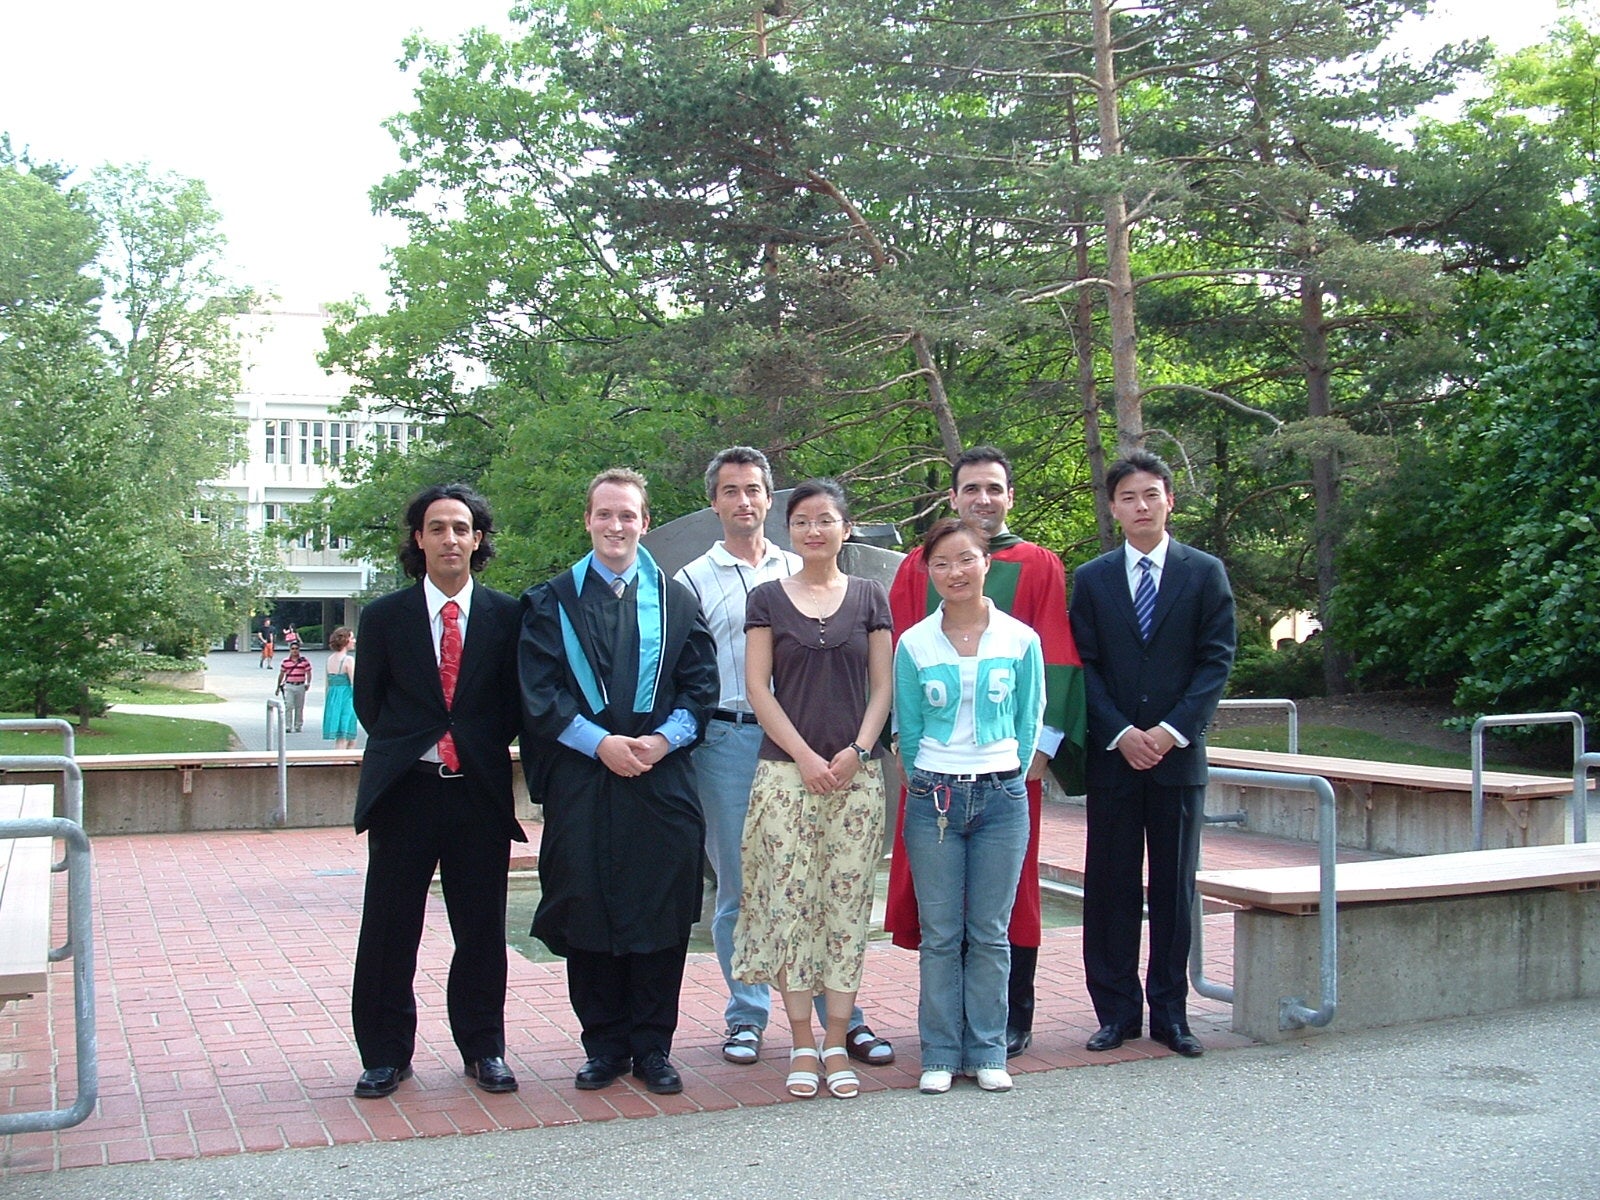 June 2007: Graduation day! From left to right: Jalil, Bryan, Holger, Annie, Yanjie, Navid, Jackie.